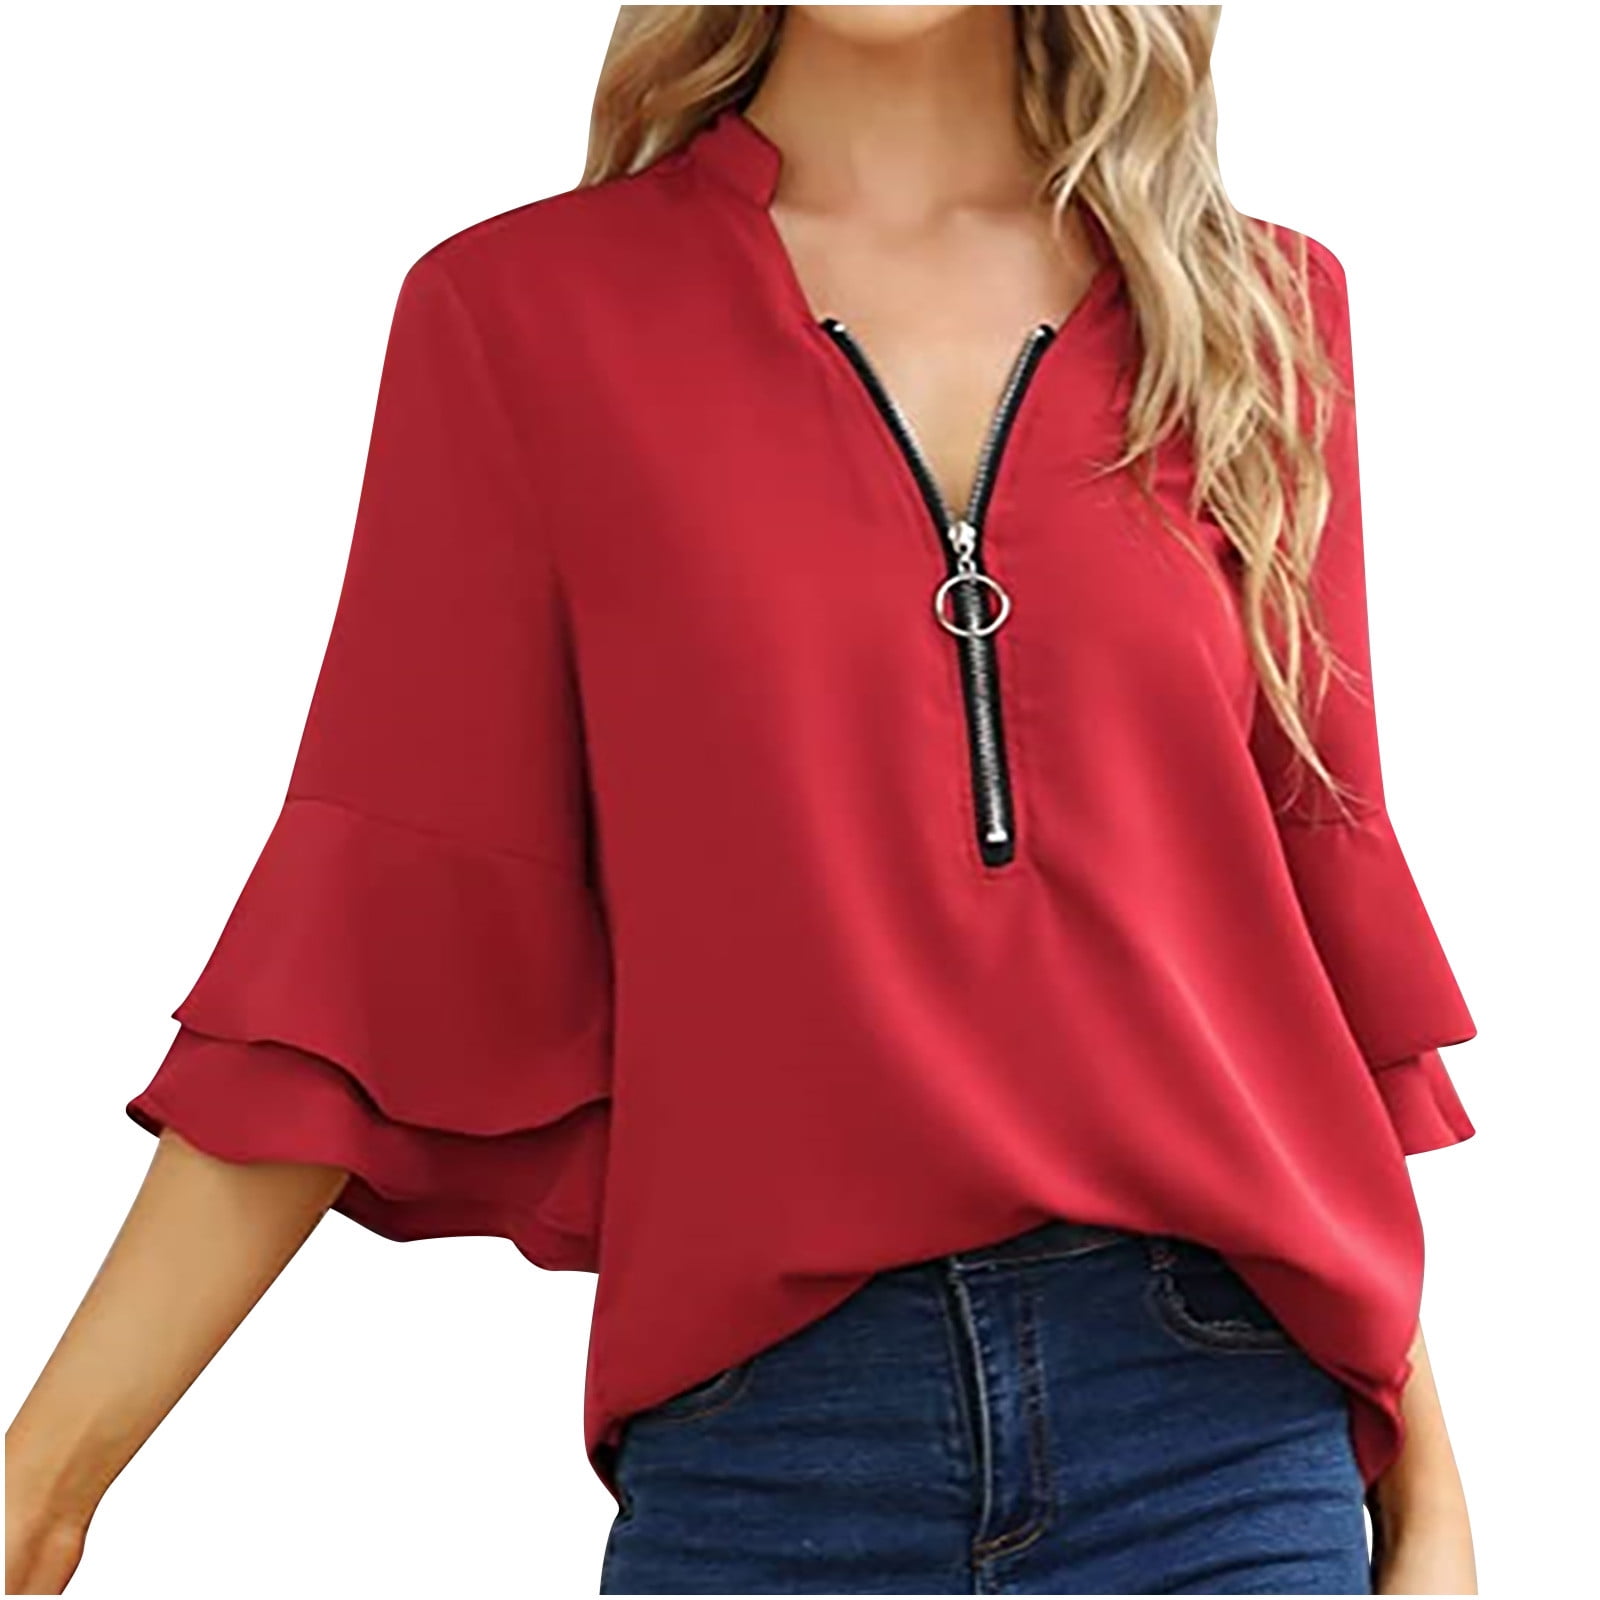 Odeerbi Shirts for Women Oversized T-Shirts Half Sleeves Fashion Casual  V-Neck Zip Flare Sleeve Solid Color Top Shirt Blouse Red